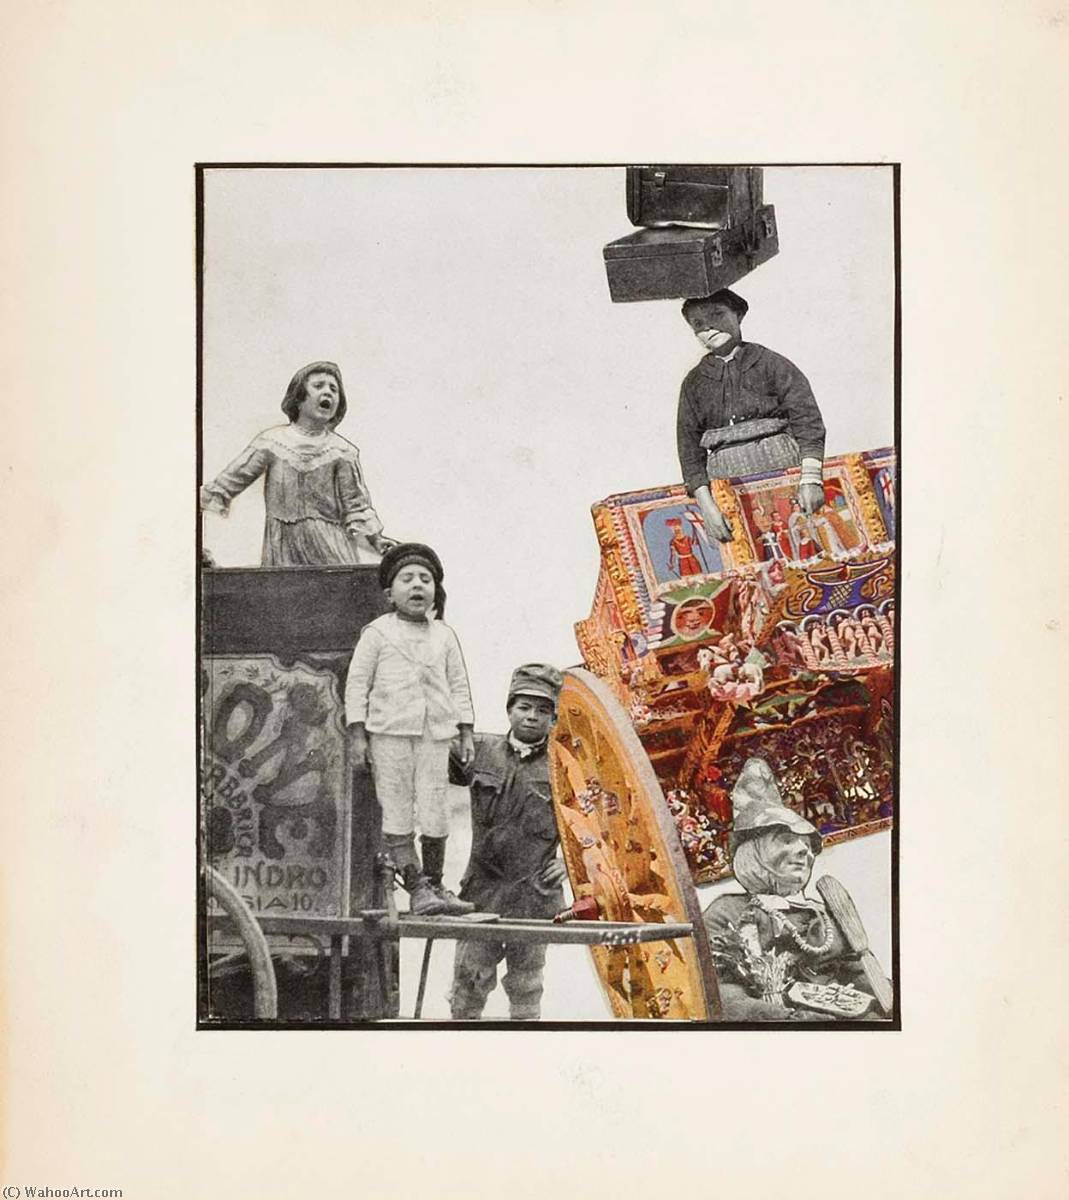 WikiOO.org - Encyclopedia of Fine Arts - Lukisan, Artwork Joseph Cornell - Untitled (Children with Carnival Carts and Suitcases)